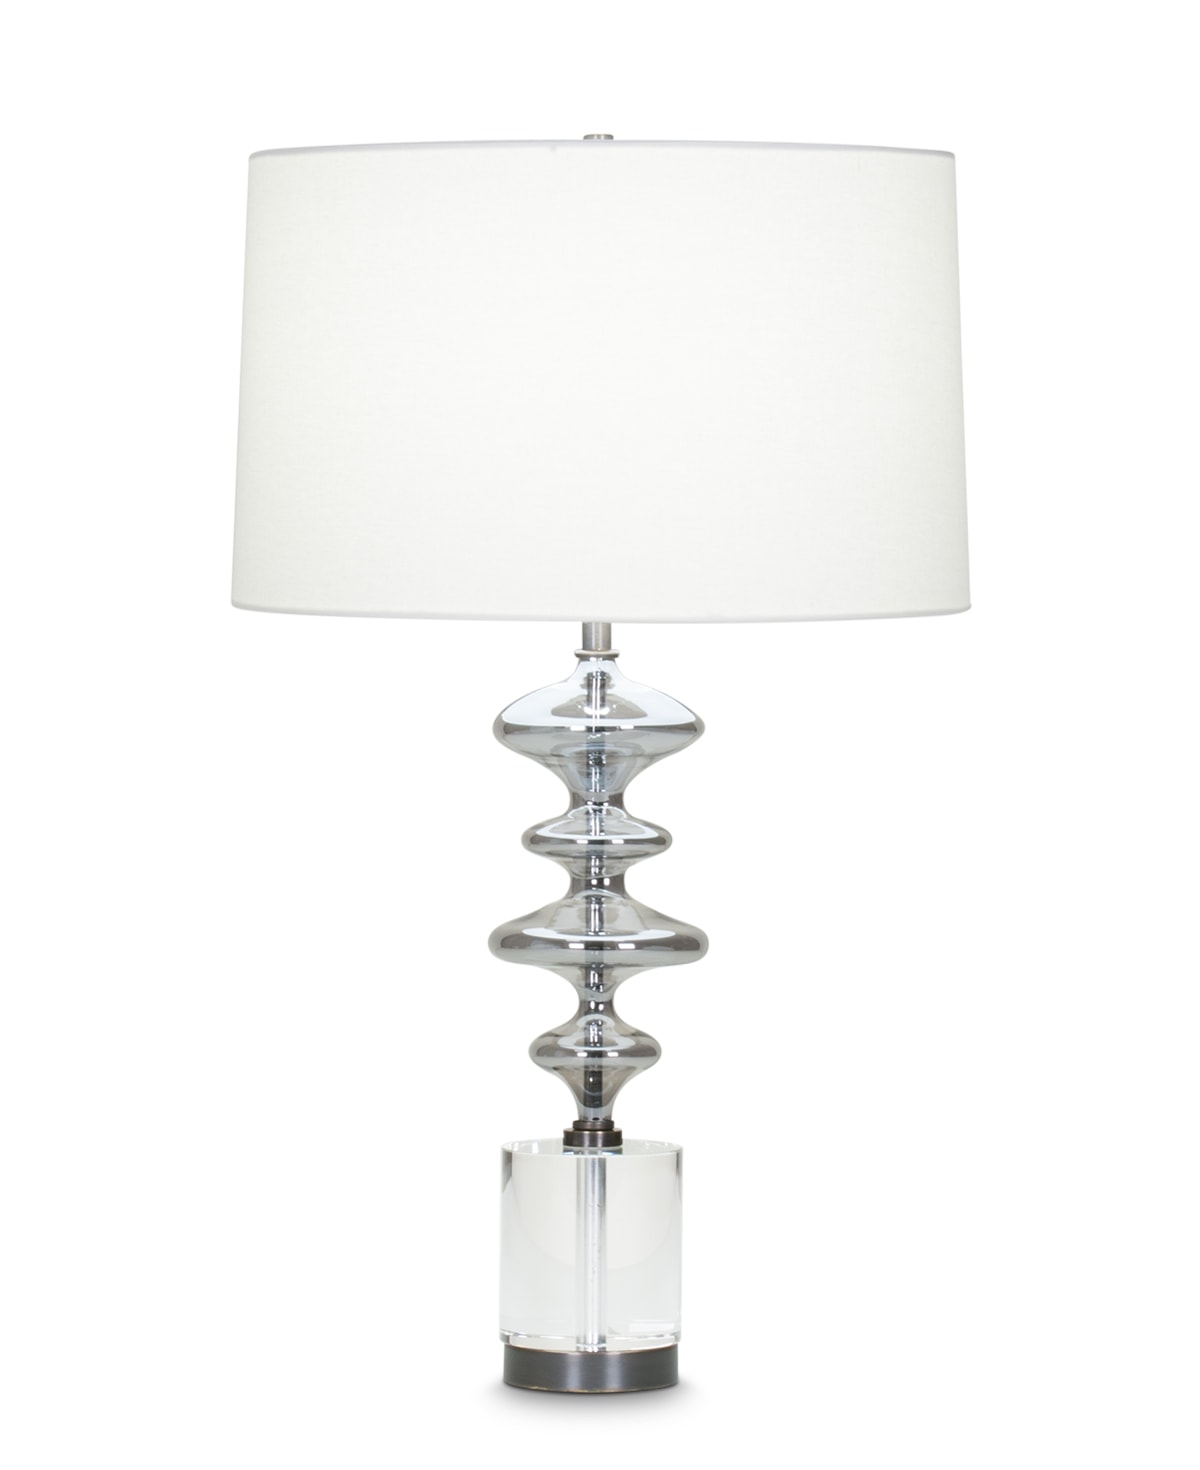 FlowDecor Blume Table Lamp in crystal and glass with grey finish and metal with bronze finish and off-white cotton tapered drum shade (# 4049)